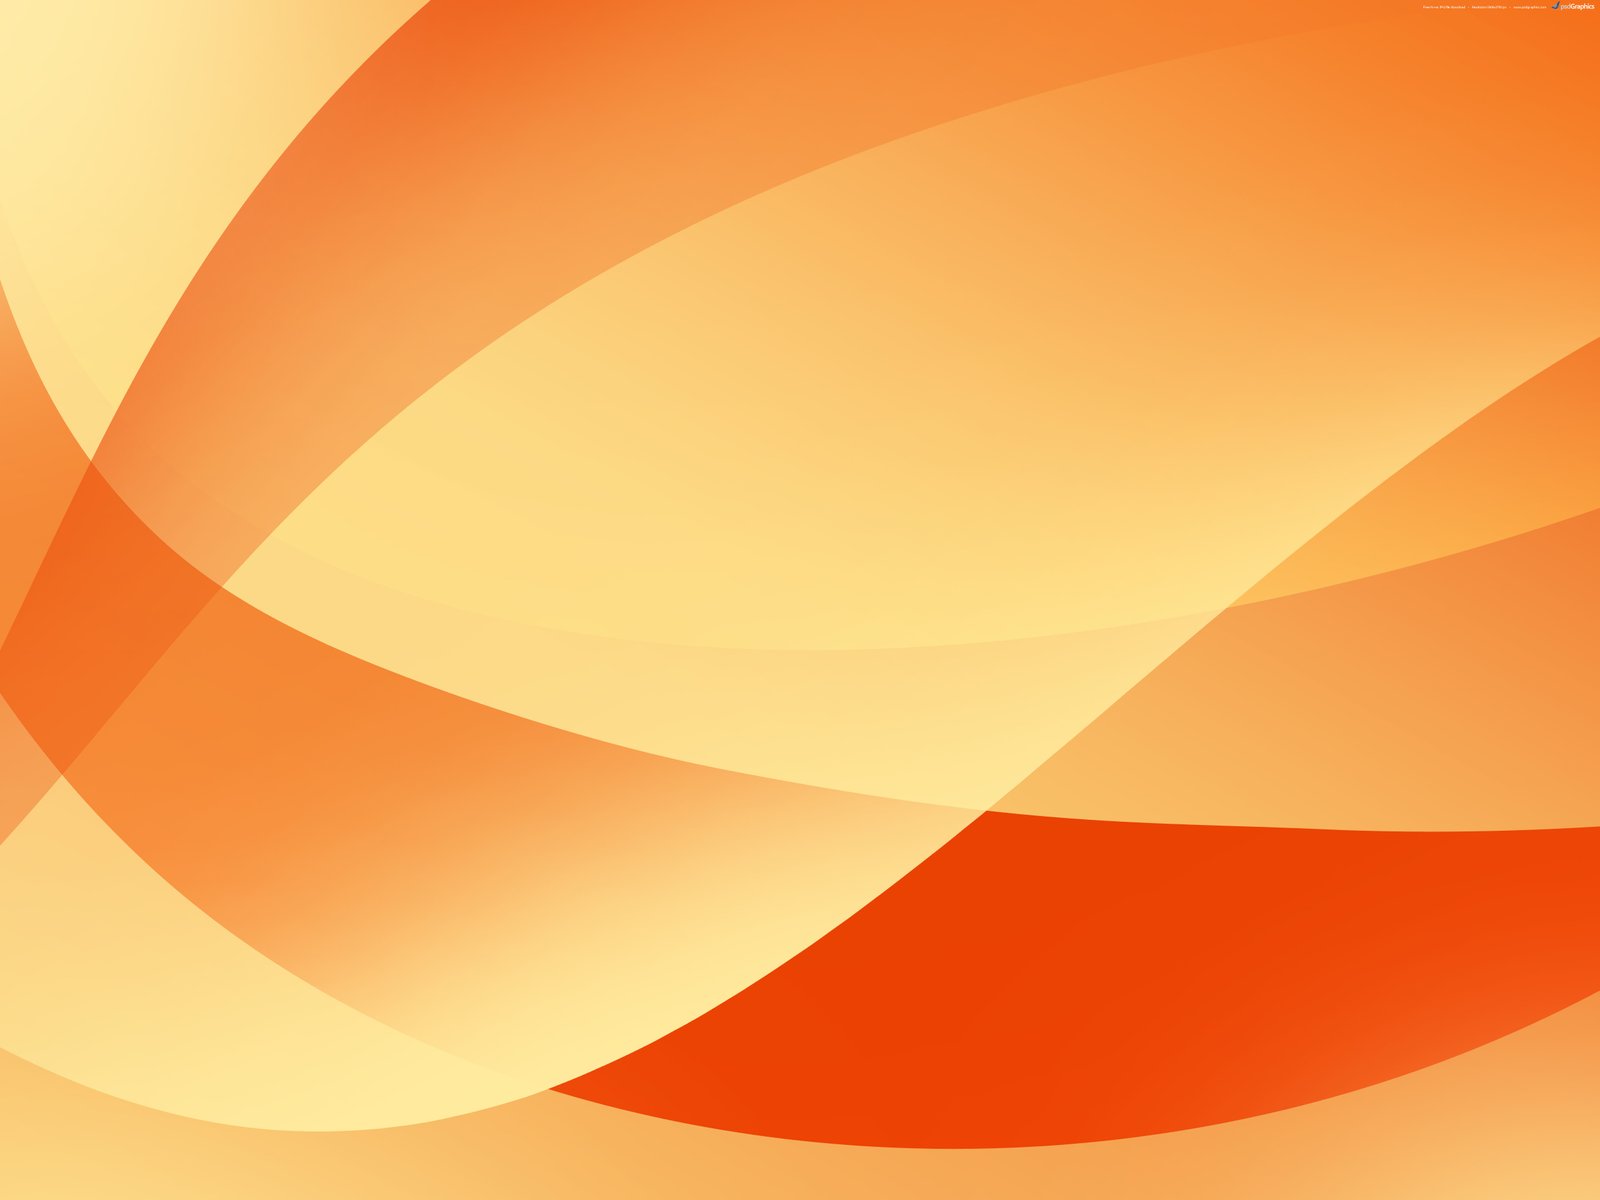 Abstract orange backgrounds | PSDgraphics